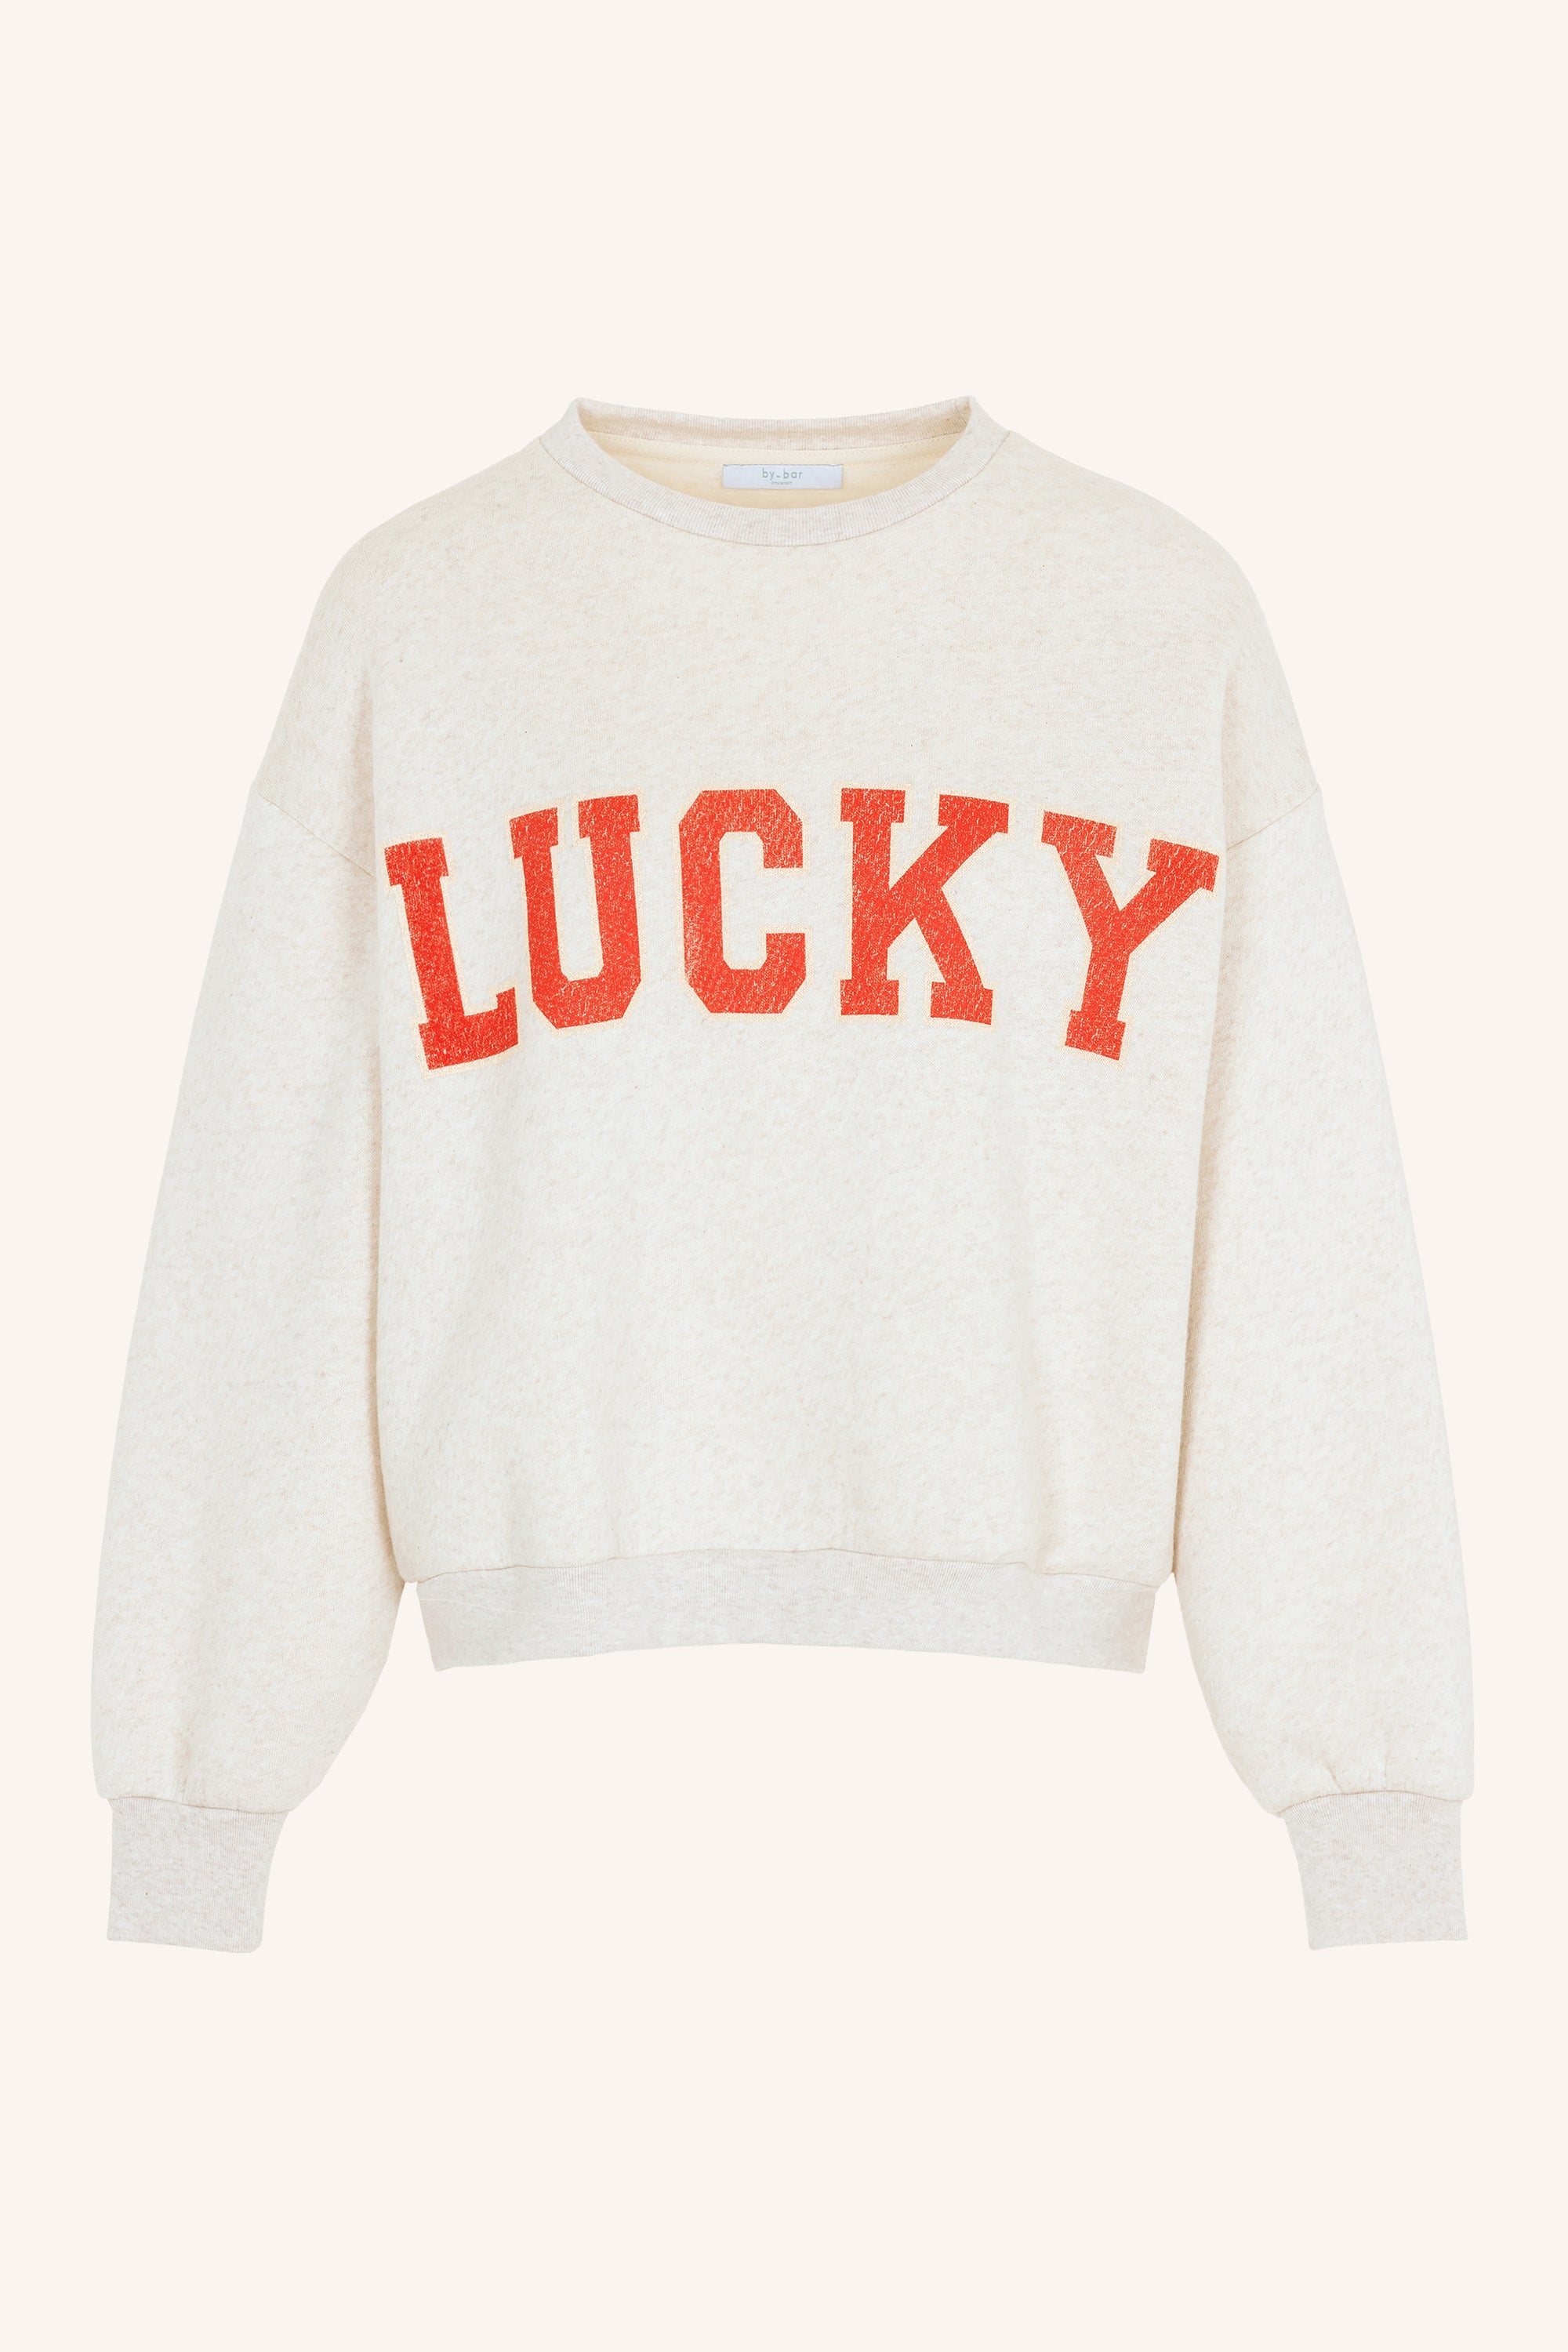 bibi lucky vintage sweater | oyster melee